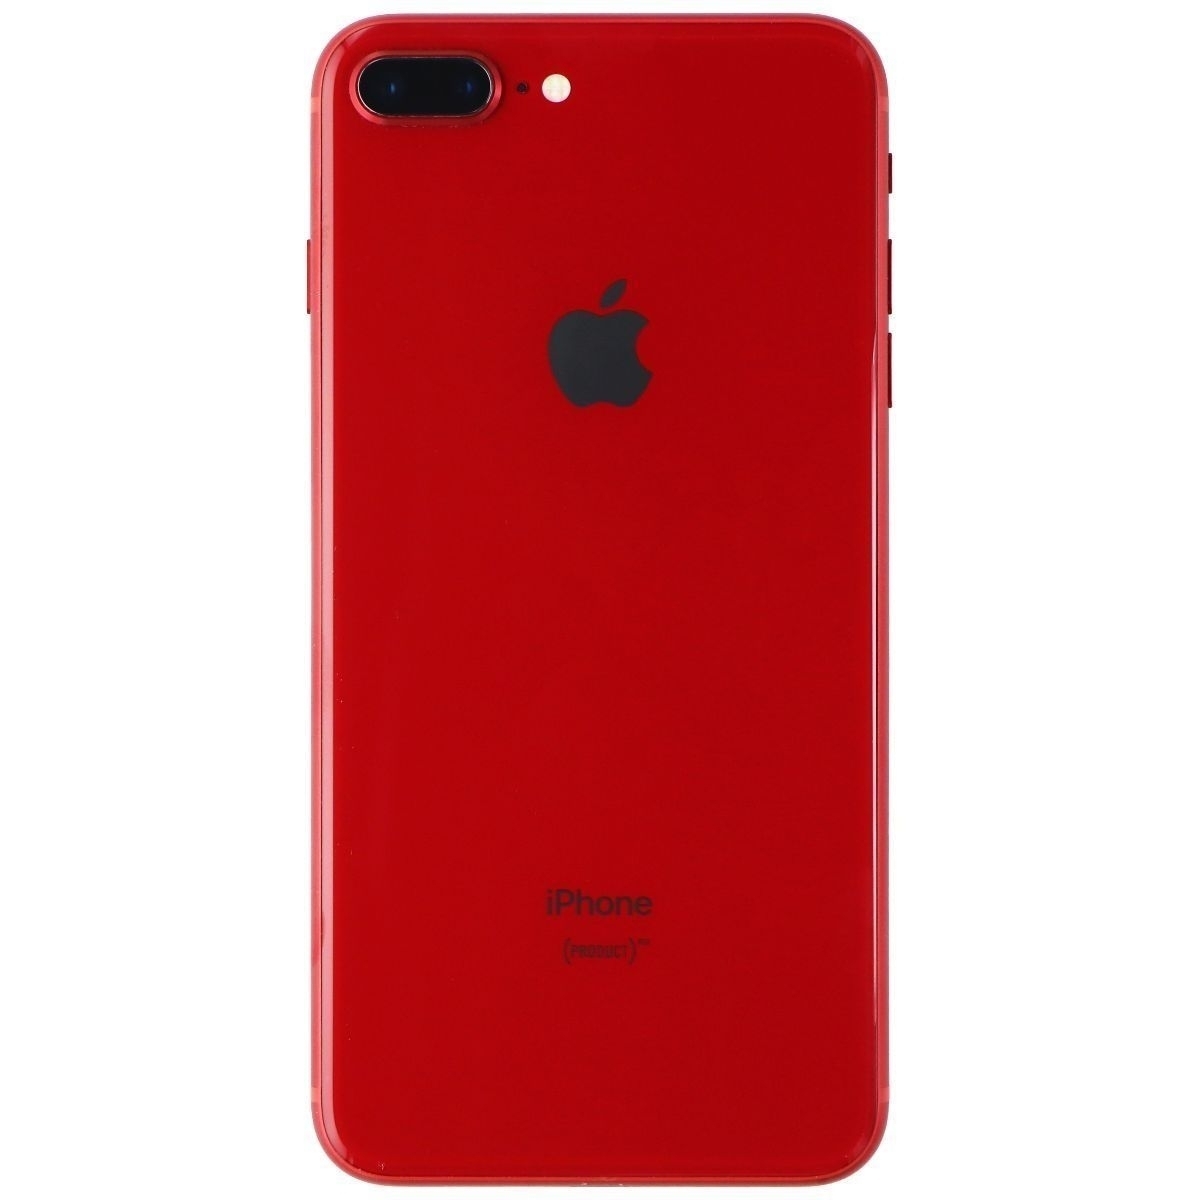 Apple IPhone 8 Plus (5.5-inch) Smartphone (A1864) Unlocked - 64GB/RED